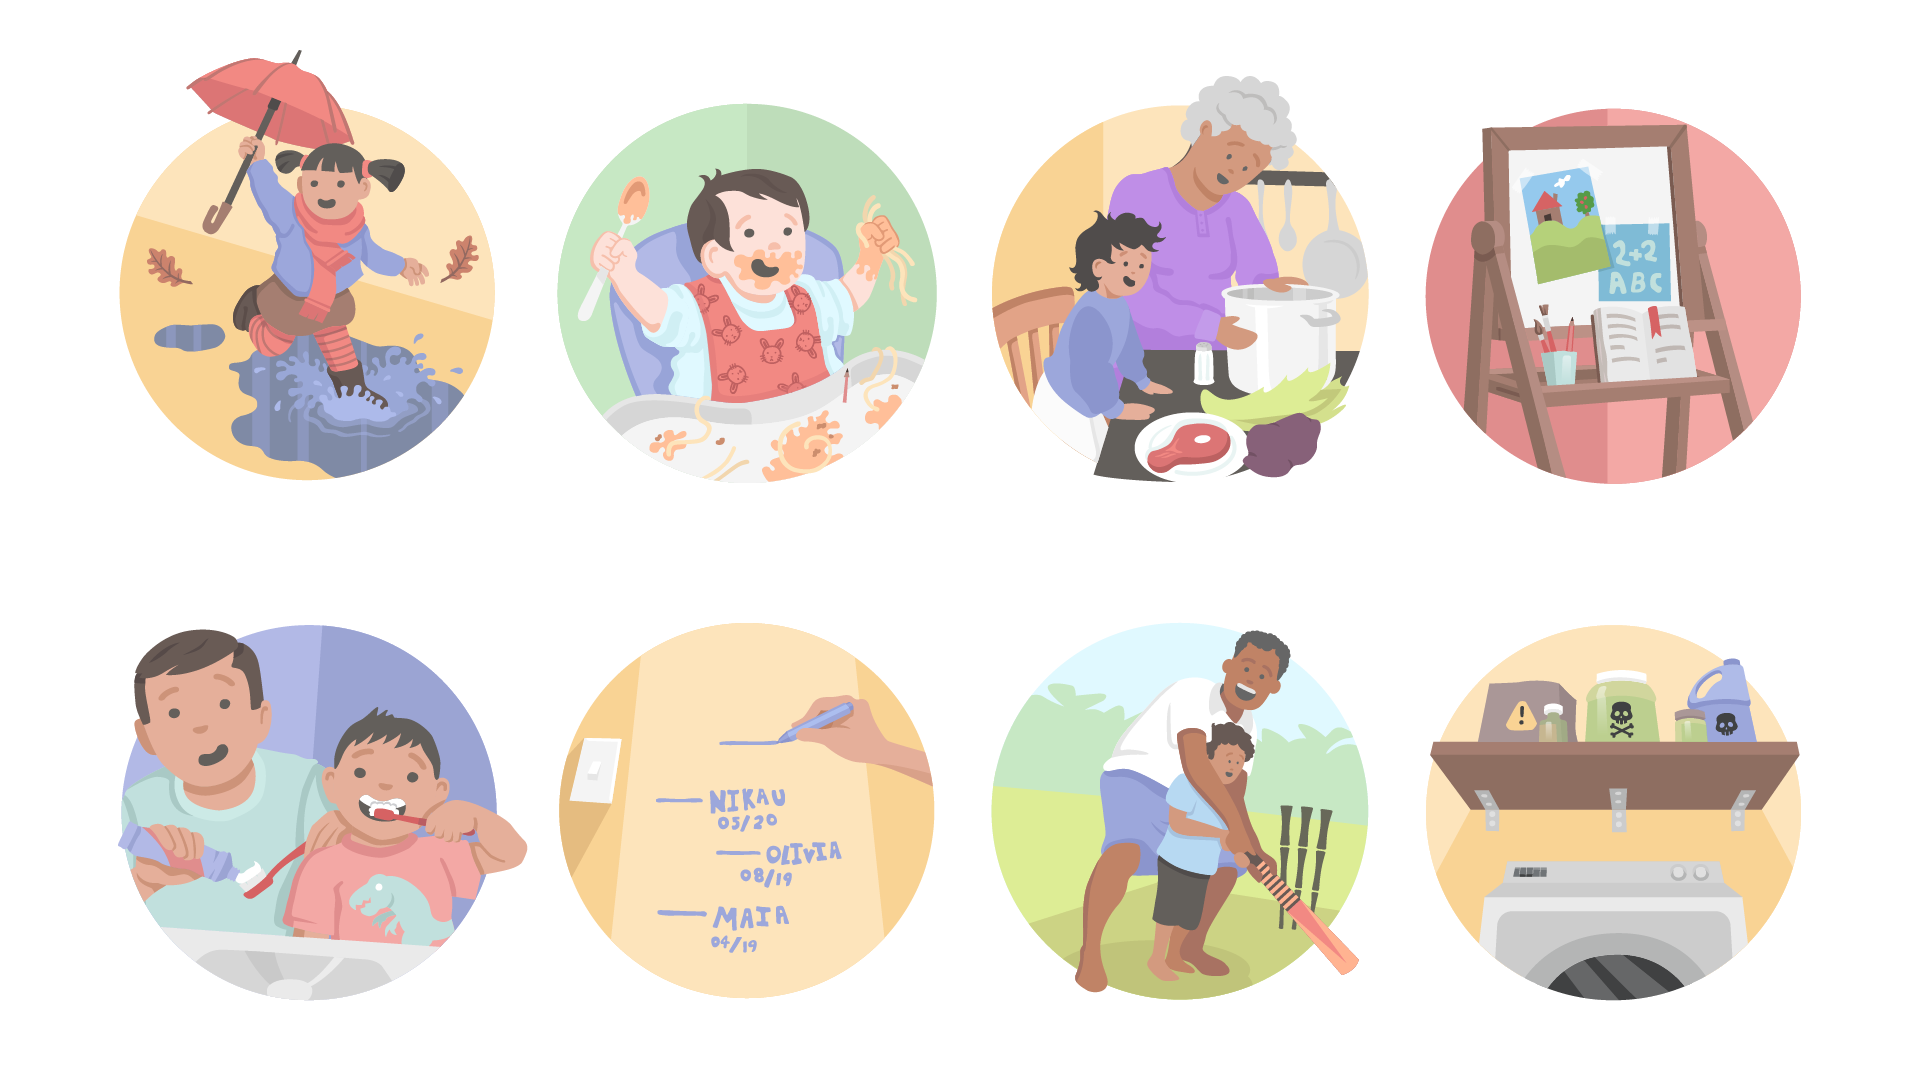 New graphics of different families used for SmartStart